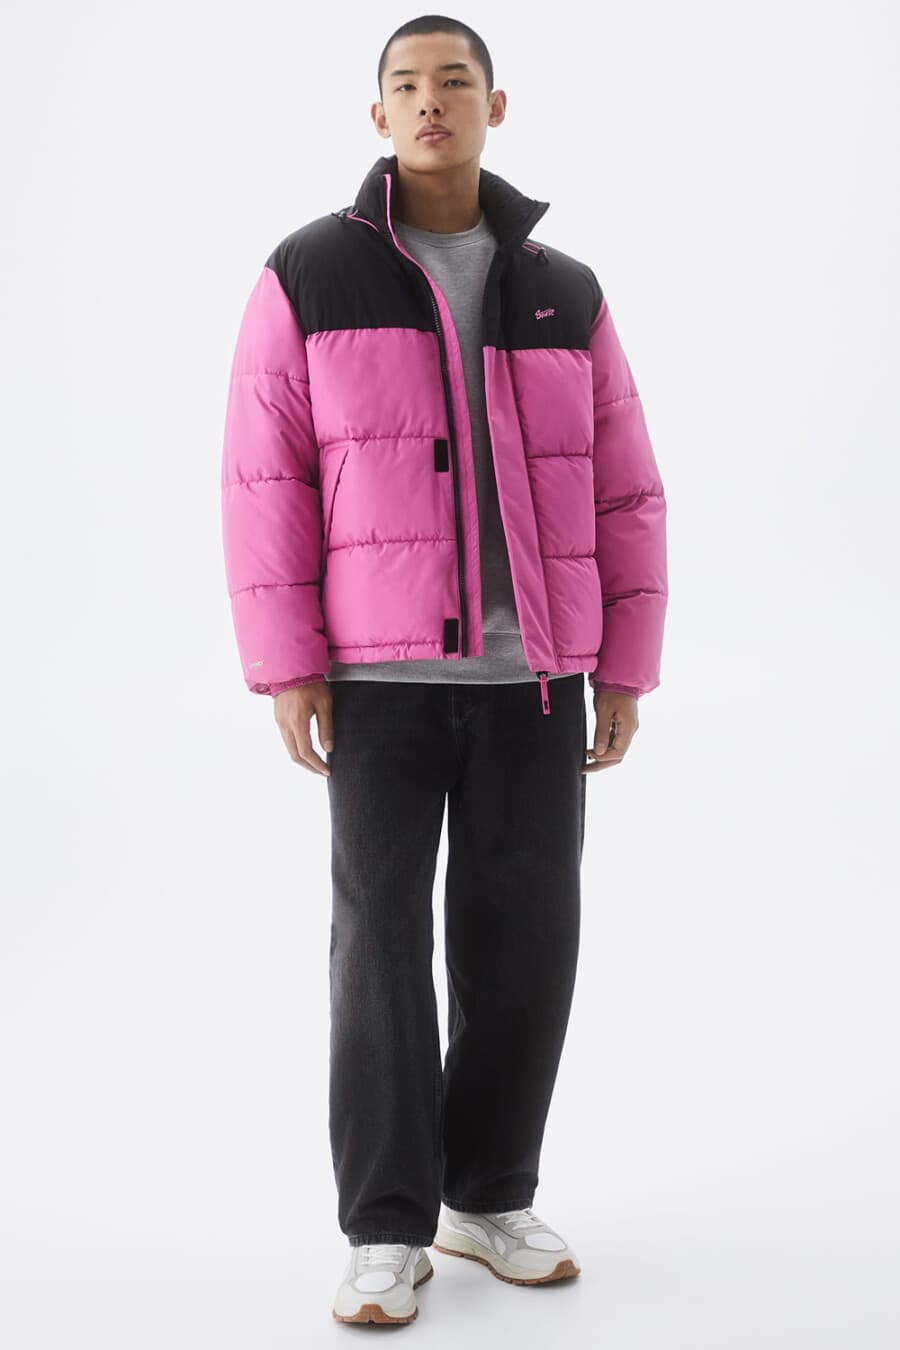 Men's black baggy jeans, grey T-shirt, bright pink puffer jacket and chunky white sneakers outfit